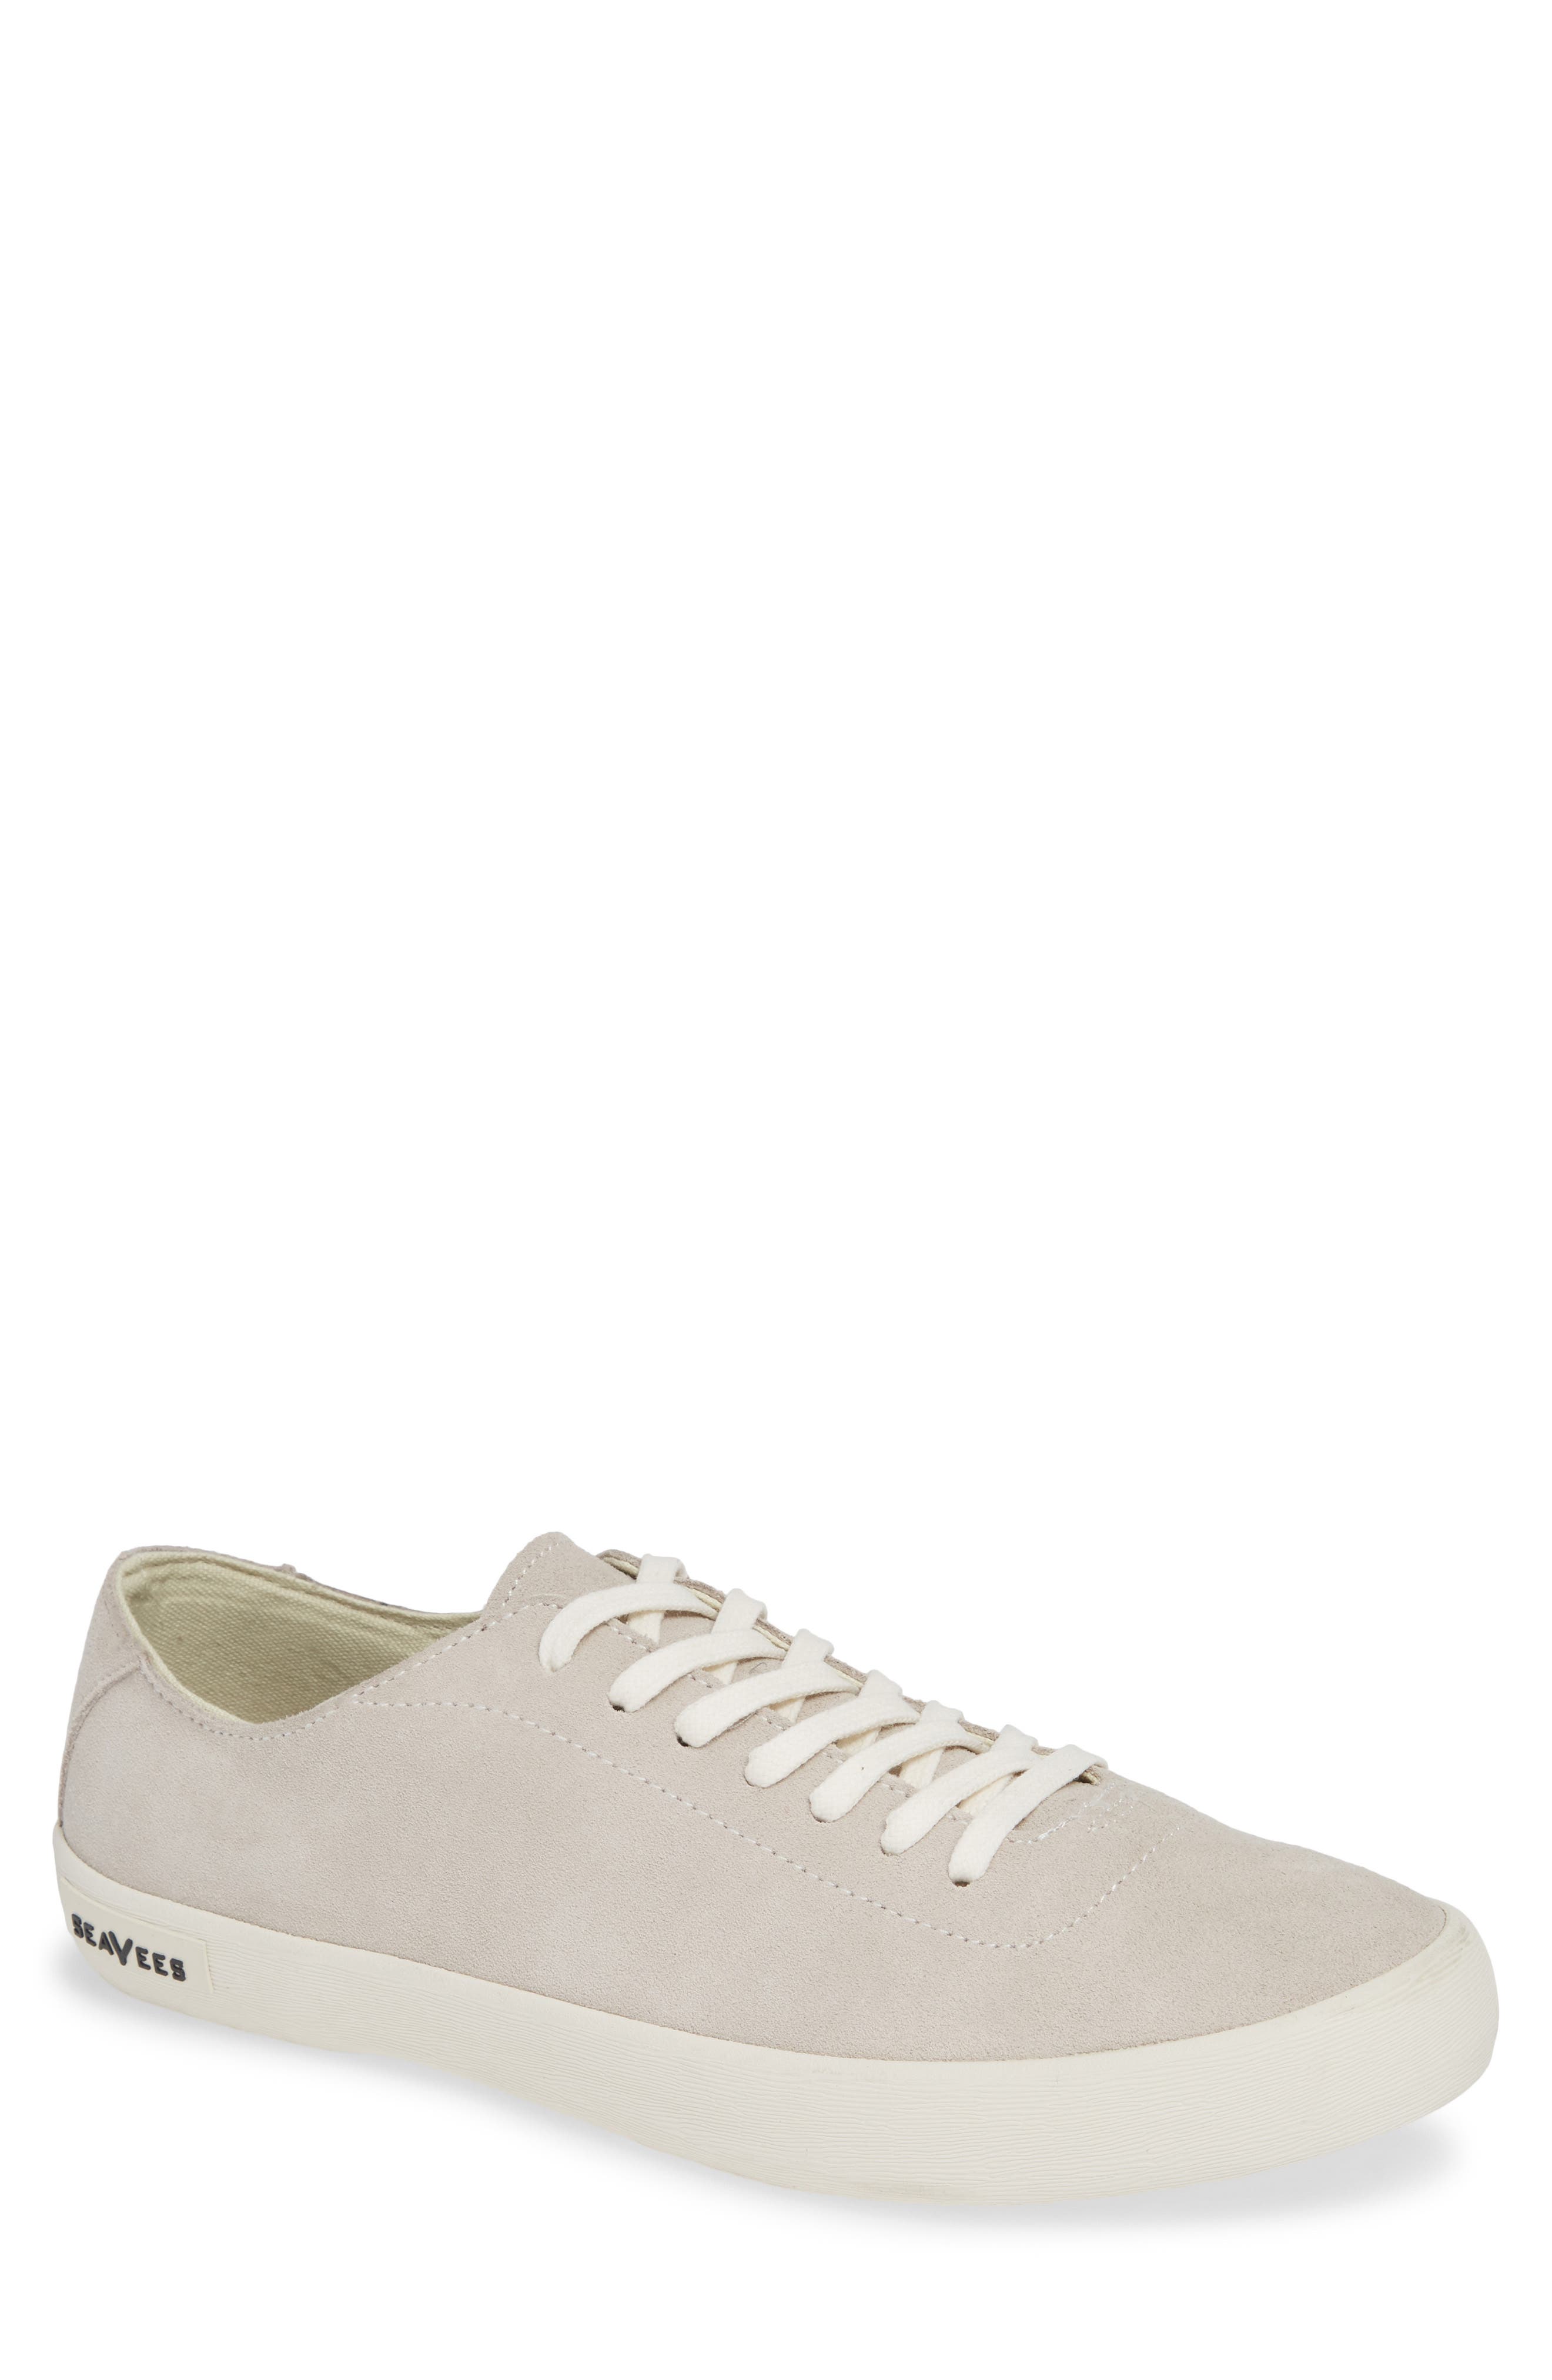 Seavees Racquet Suede Club Sneaker In Open White60